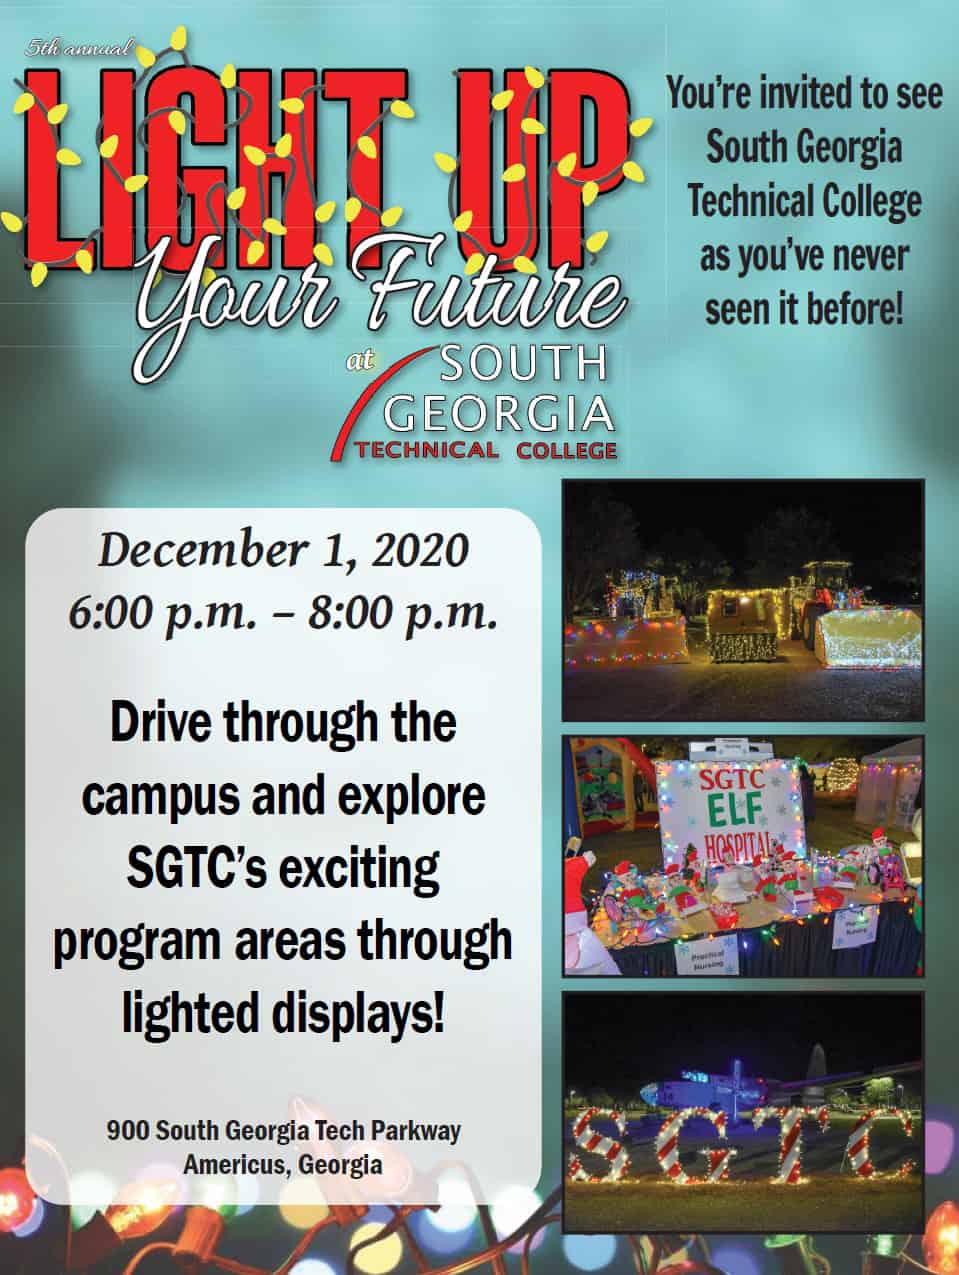 South Georgia Technical College is giving back on Giving Tuesday! Everyone is invited to the FREE 5th annual “Light Up Your Future” Event at South Georgia Technical College on Tuesday, December 1st from 6 p.m. to 8 p.m.